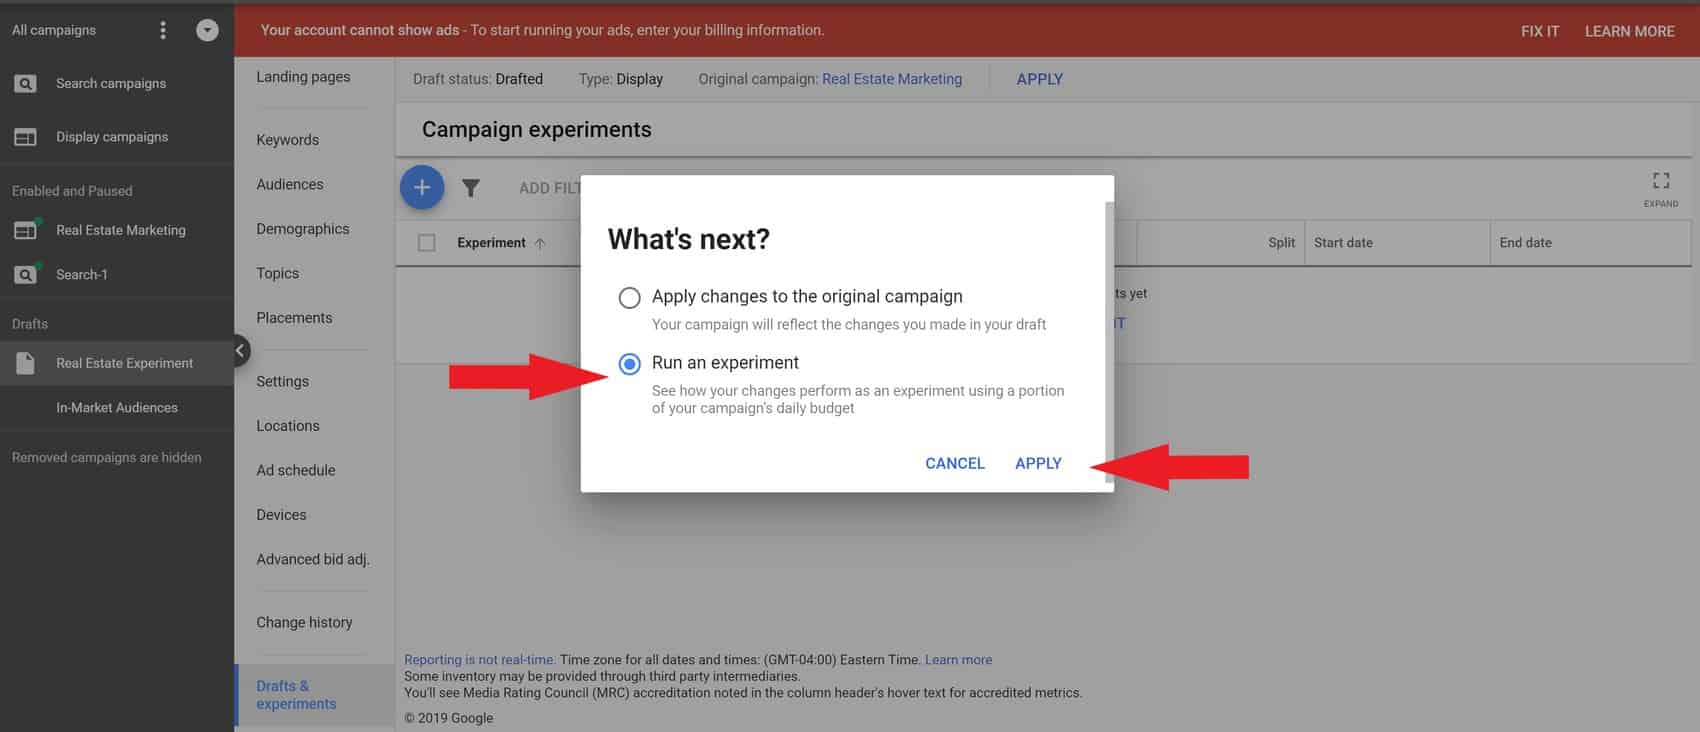 Select “Run an Experiment” and click “Apply” again